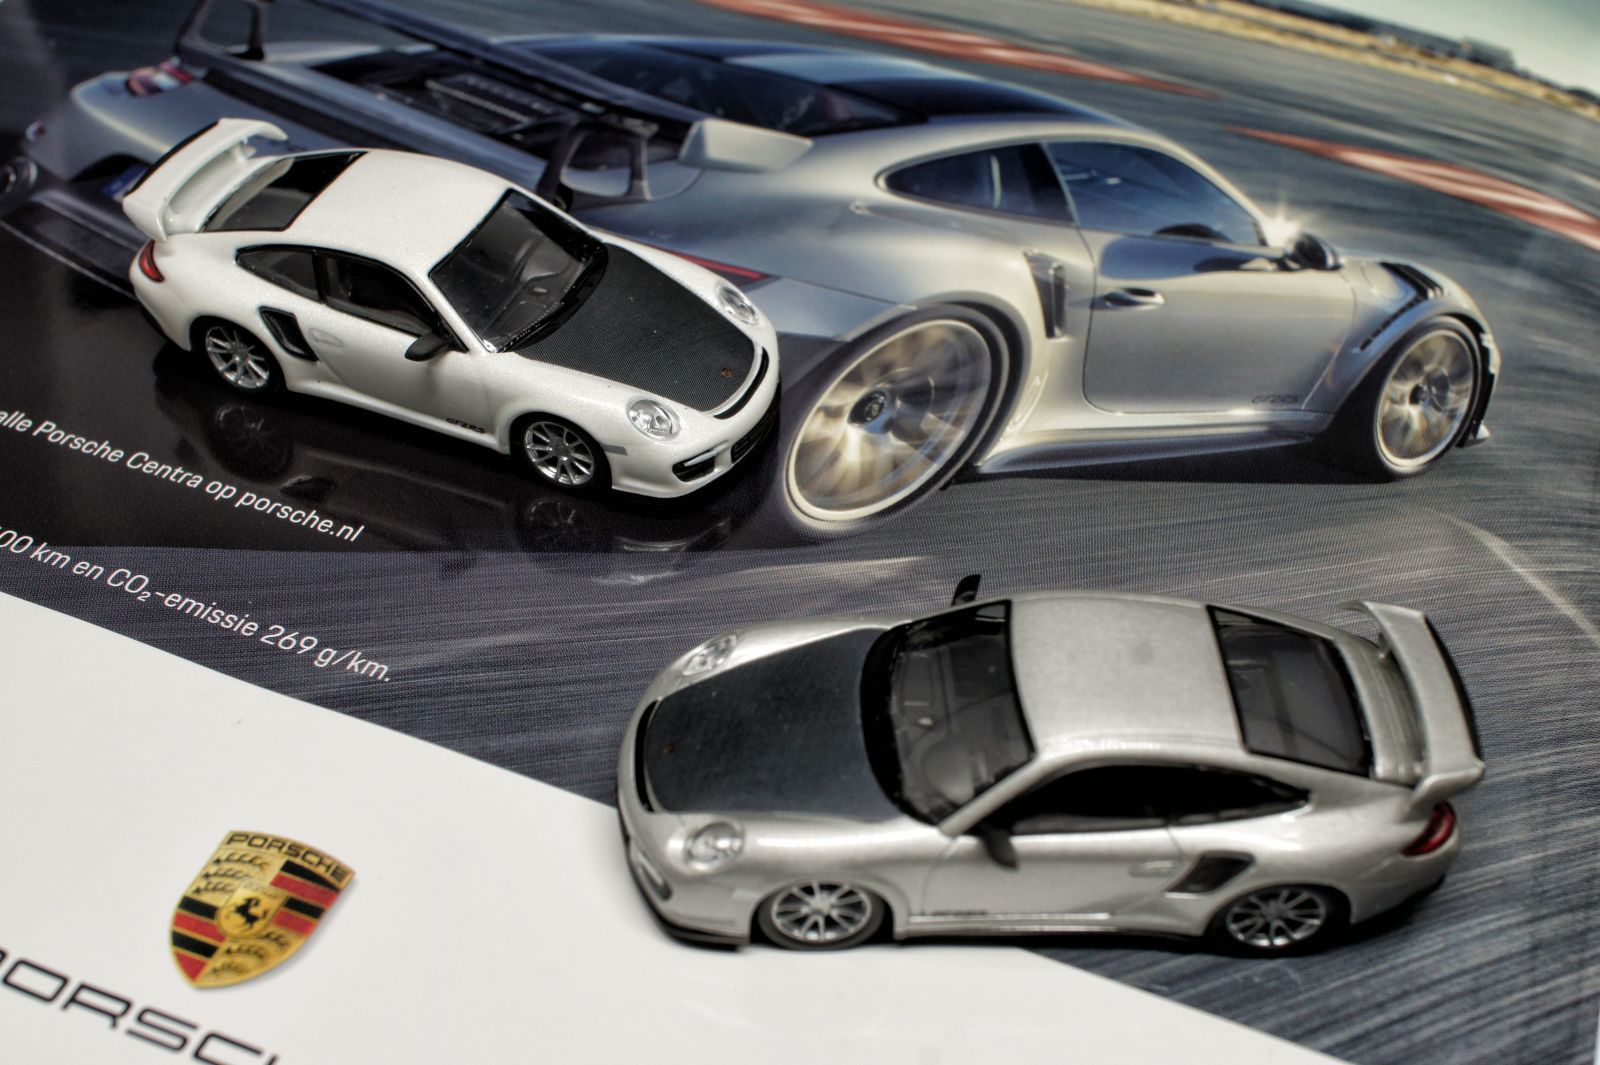 Illustration for article titled Teutonic Tuesday: Mehr RennSport. Mit Turbo!